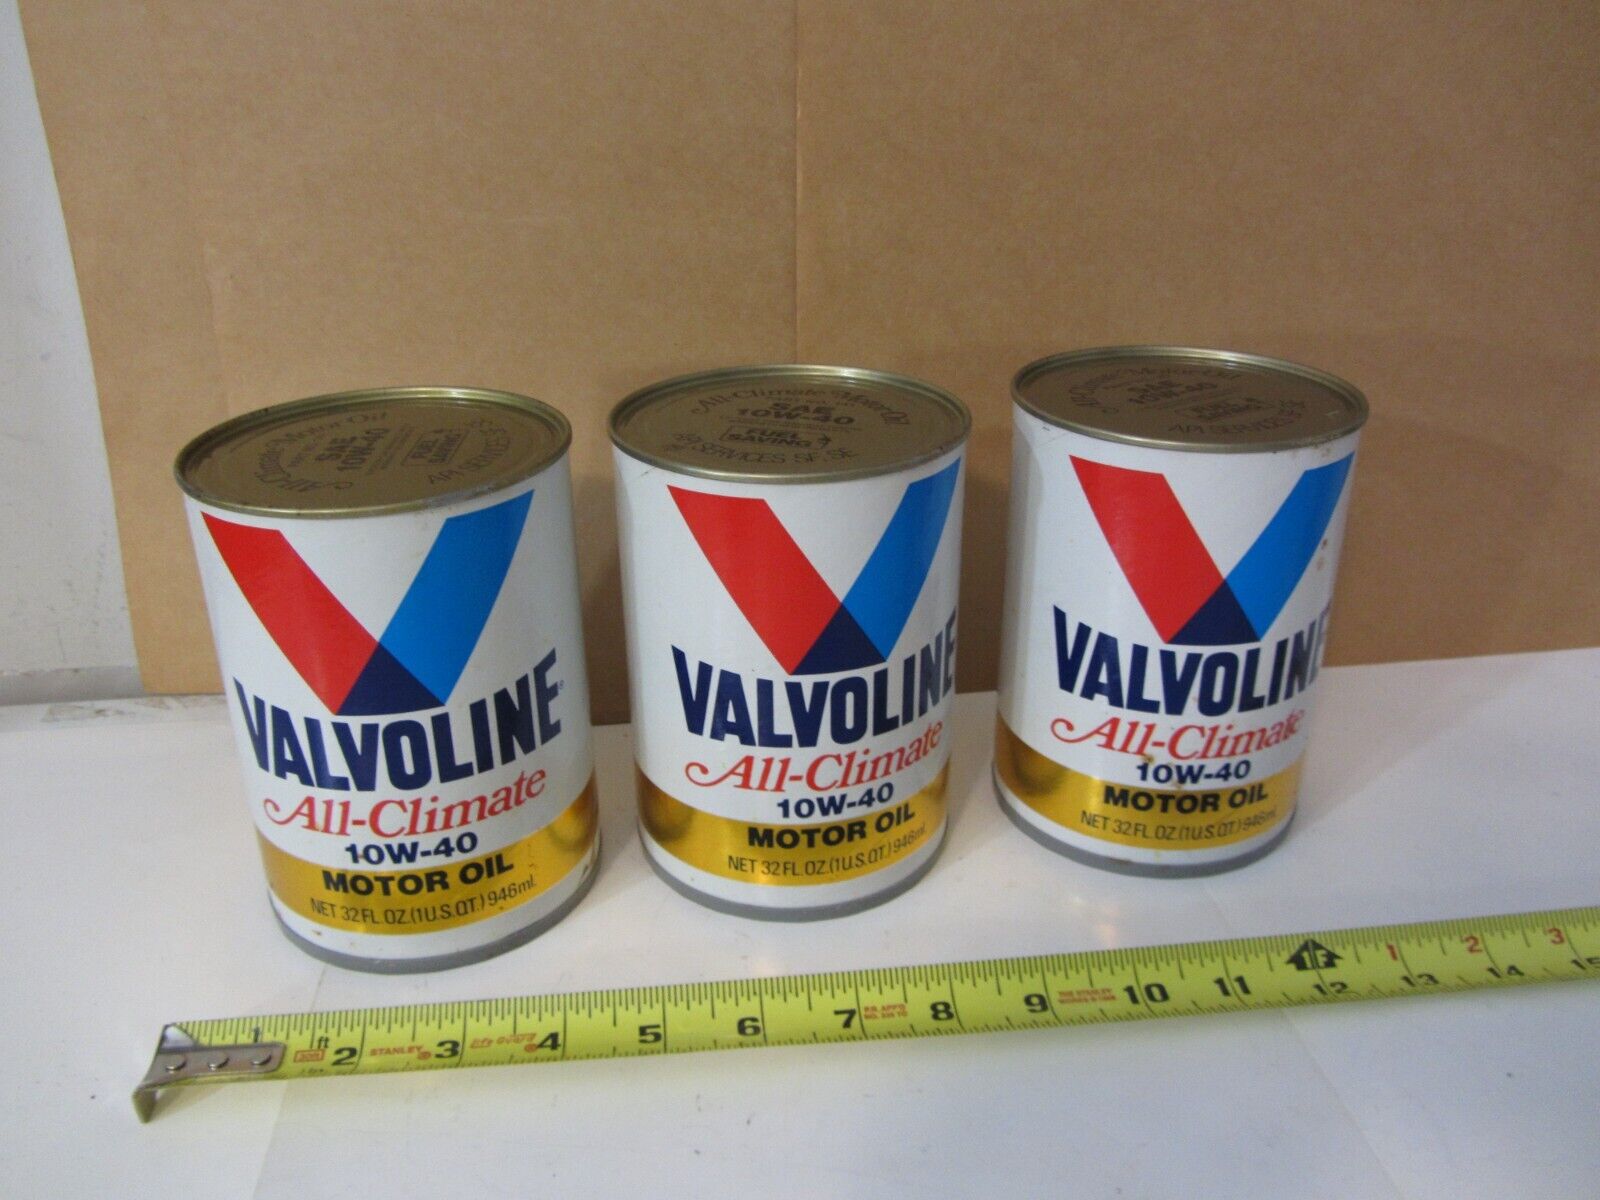 Vintage Valvoline All-Climate 10W-40 motor oil PART No. 141 (LOT OF 3 CANS)